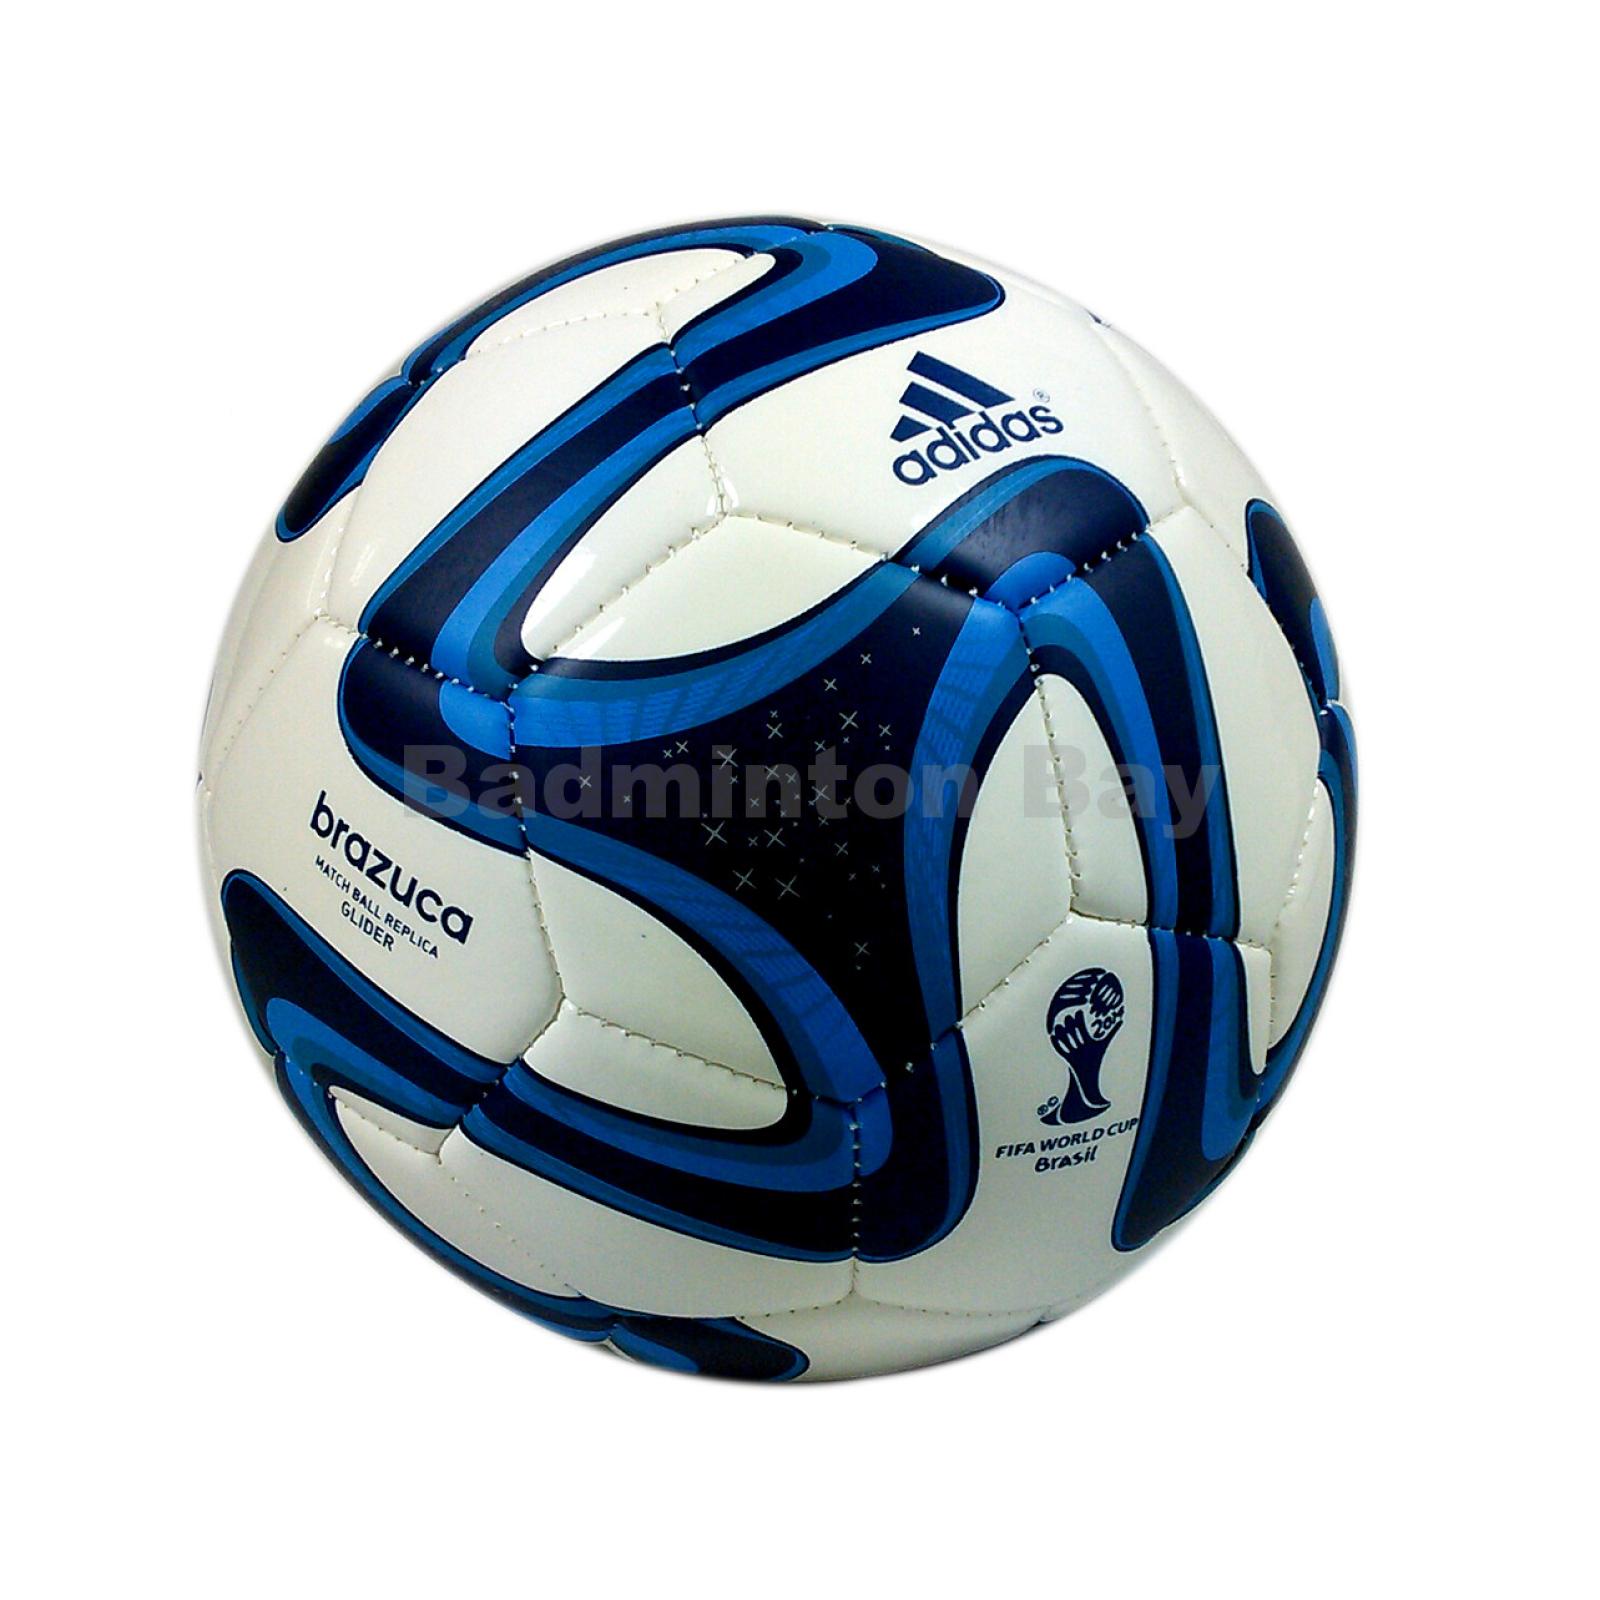 Buy Adidas Brazuca FIFA World Cup Brazil 2014 Top Glider Soccer Ball, Size  5 (White/Green) Online at Low Prices in India 